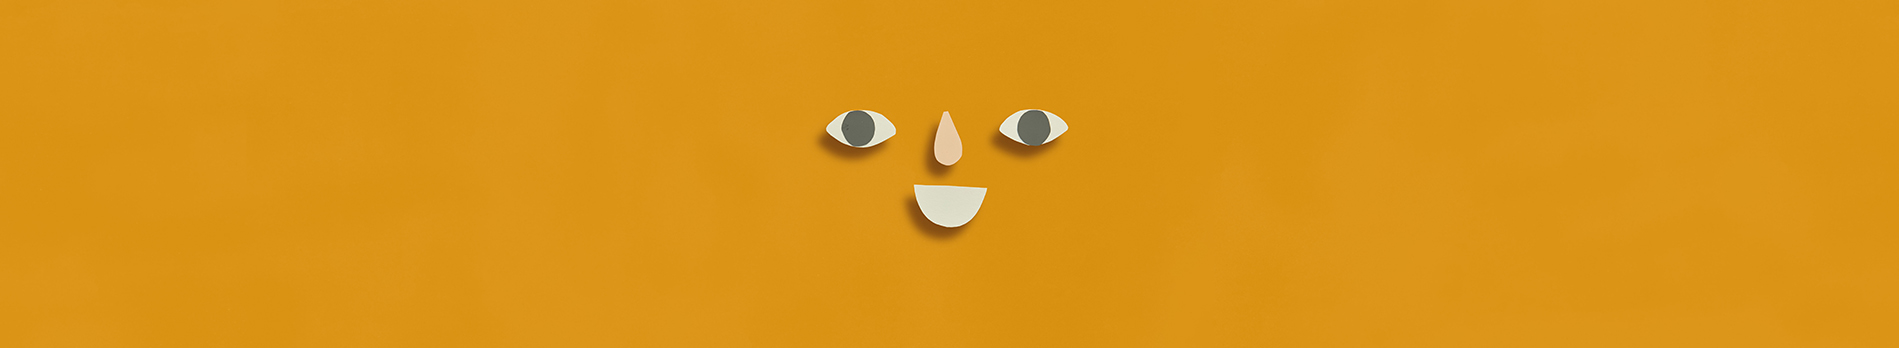 Paper cut shapes arranged in a smiling face on a dark yellow background